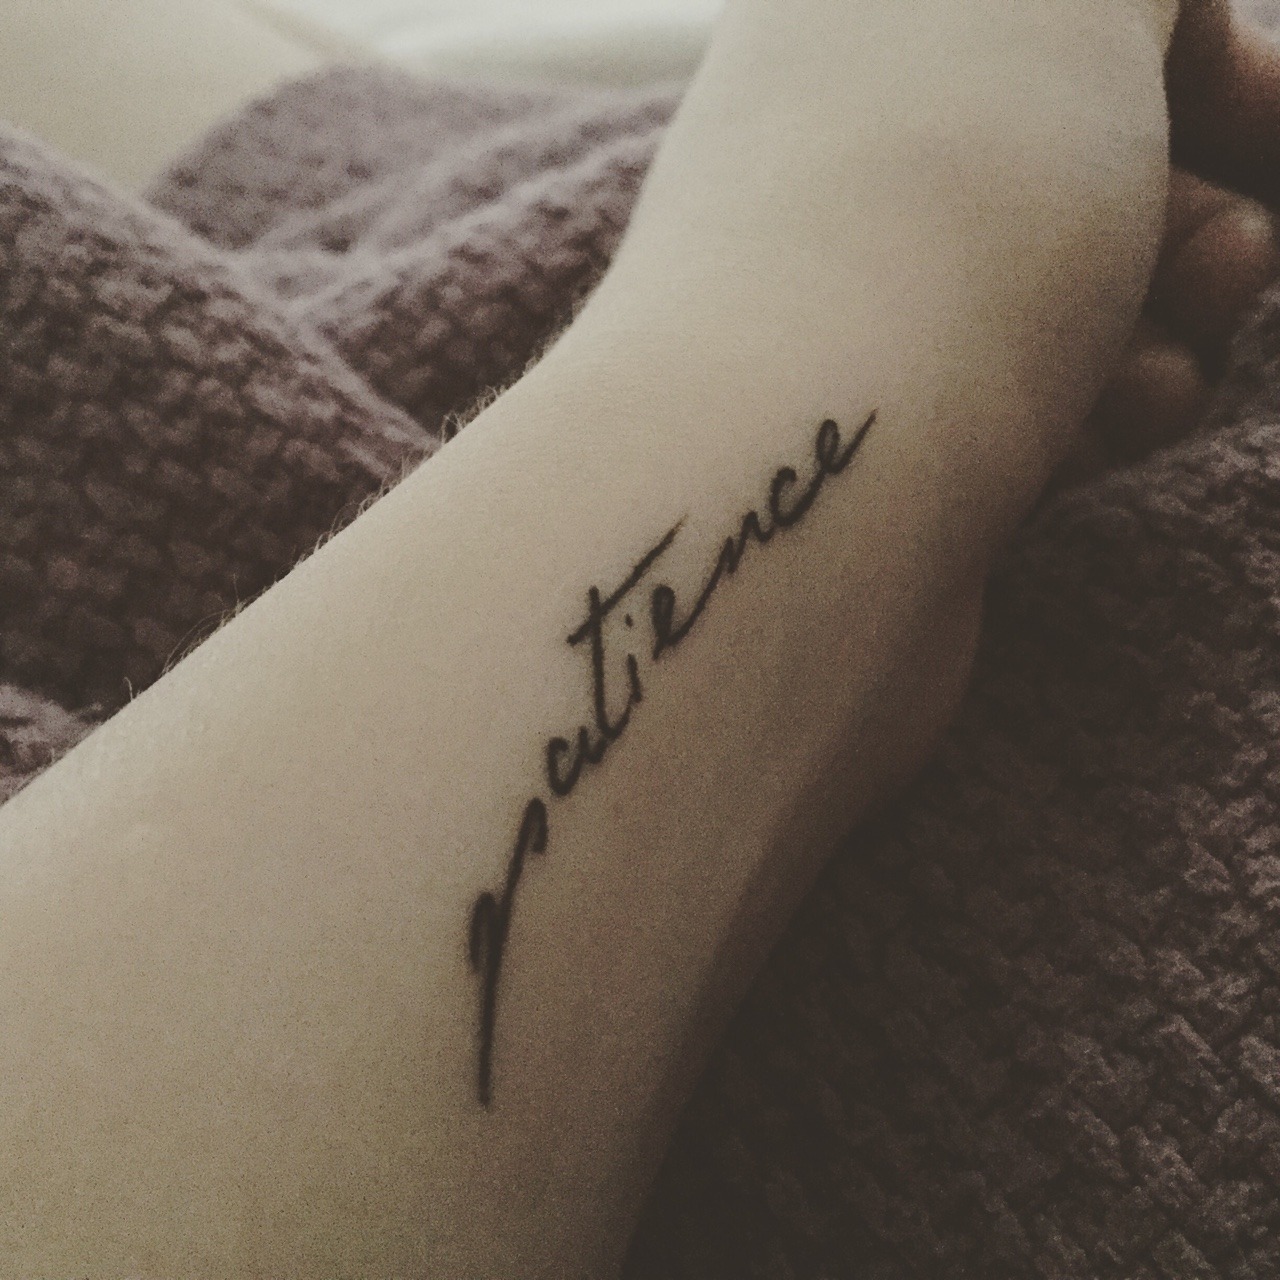 howgoesitbro:
“ I got my first tiny tattoo yesterday. Not my first tattoo, but my first small simple elegant meaningful tattoo. One that most people don’t notice, but one I see one million times a day. Work hard but Be patient, good things come to...